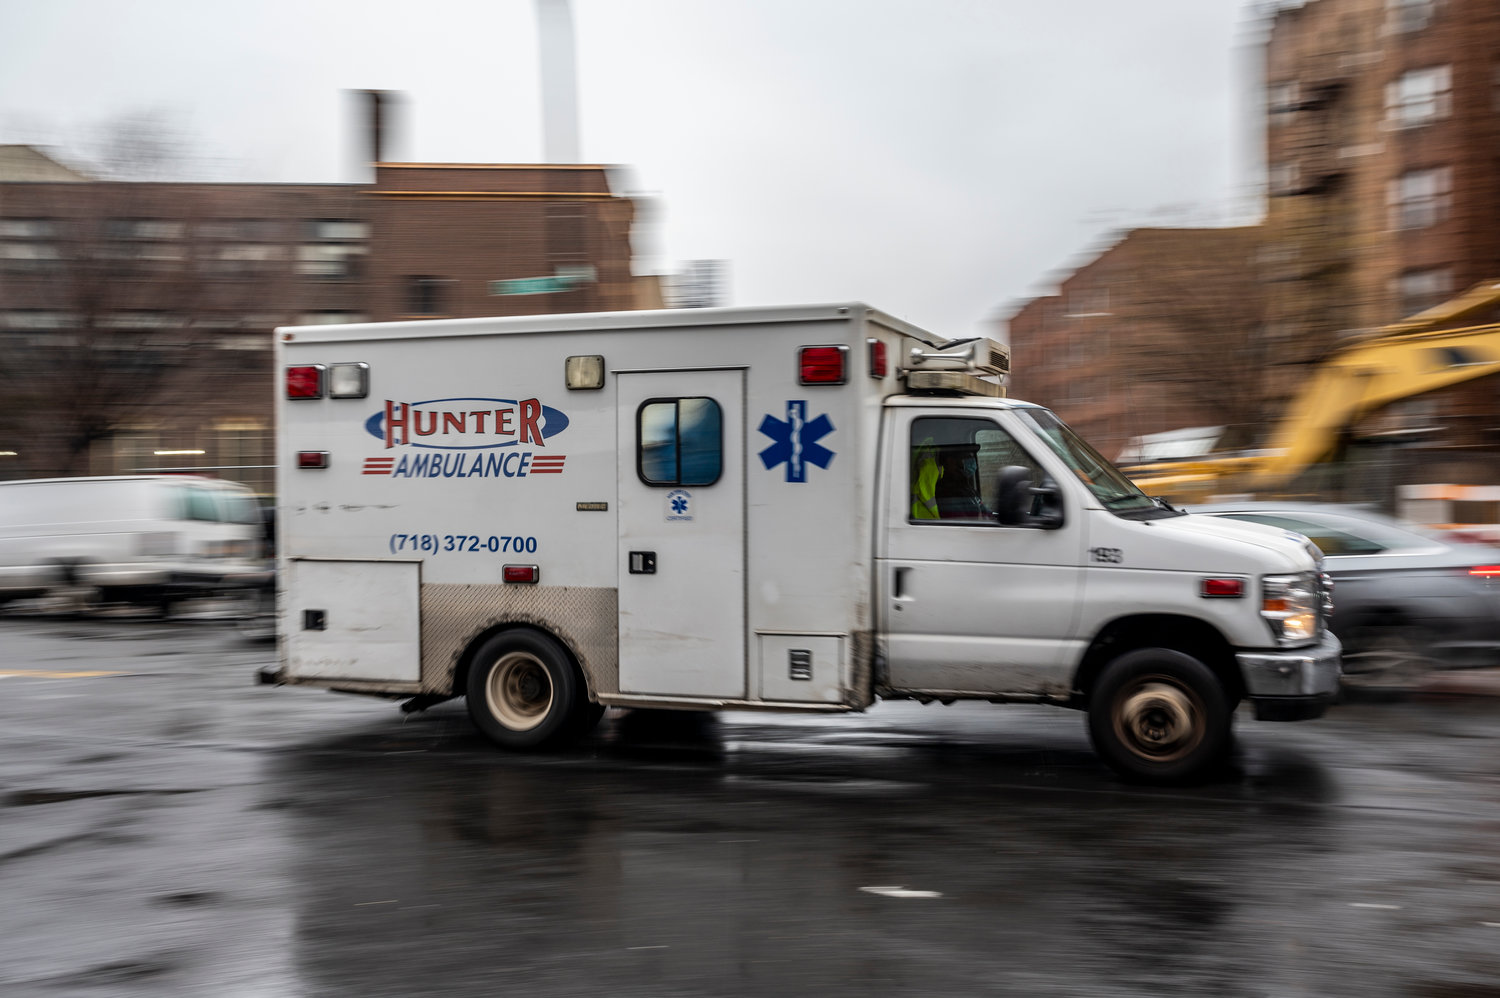 Much of the services EMS teams provides are in critical care transport — or moving intensive care patients from one hospital to another. And they’re gearing up to do it again as COVID-19 hospitalizations rise in the city.